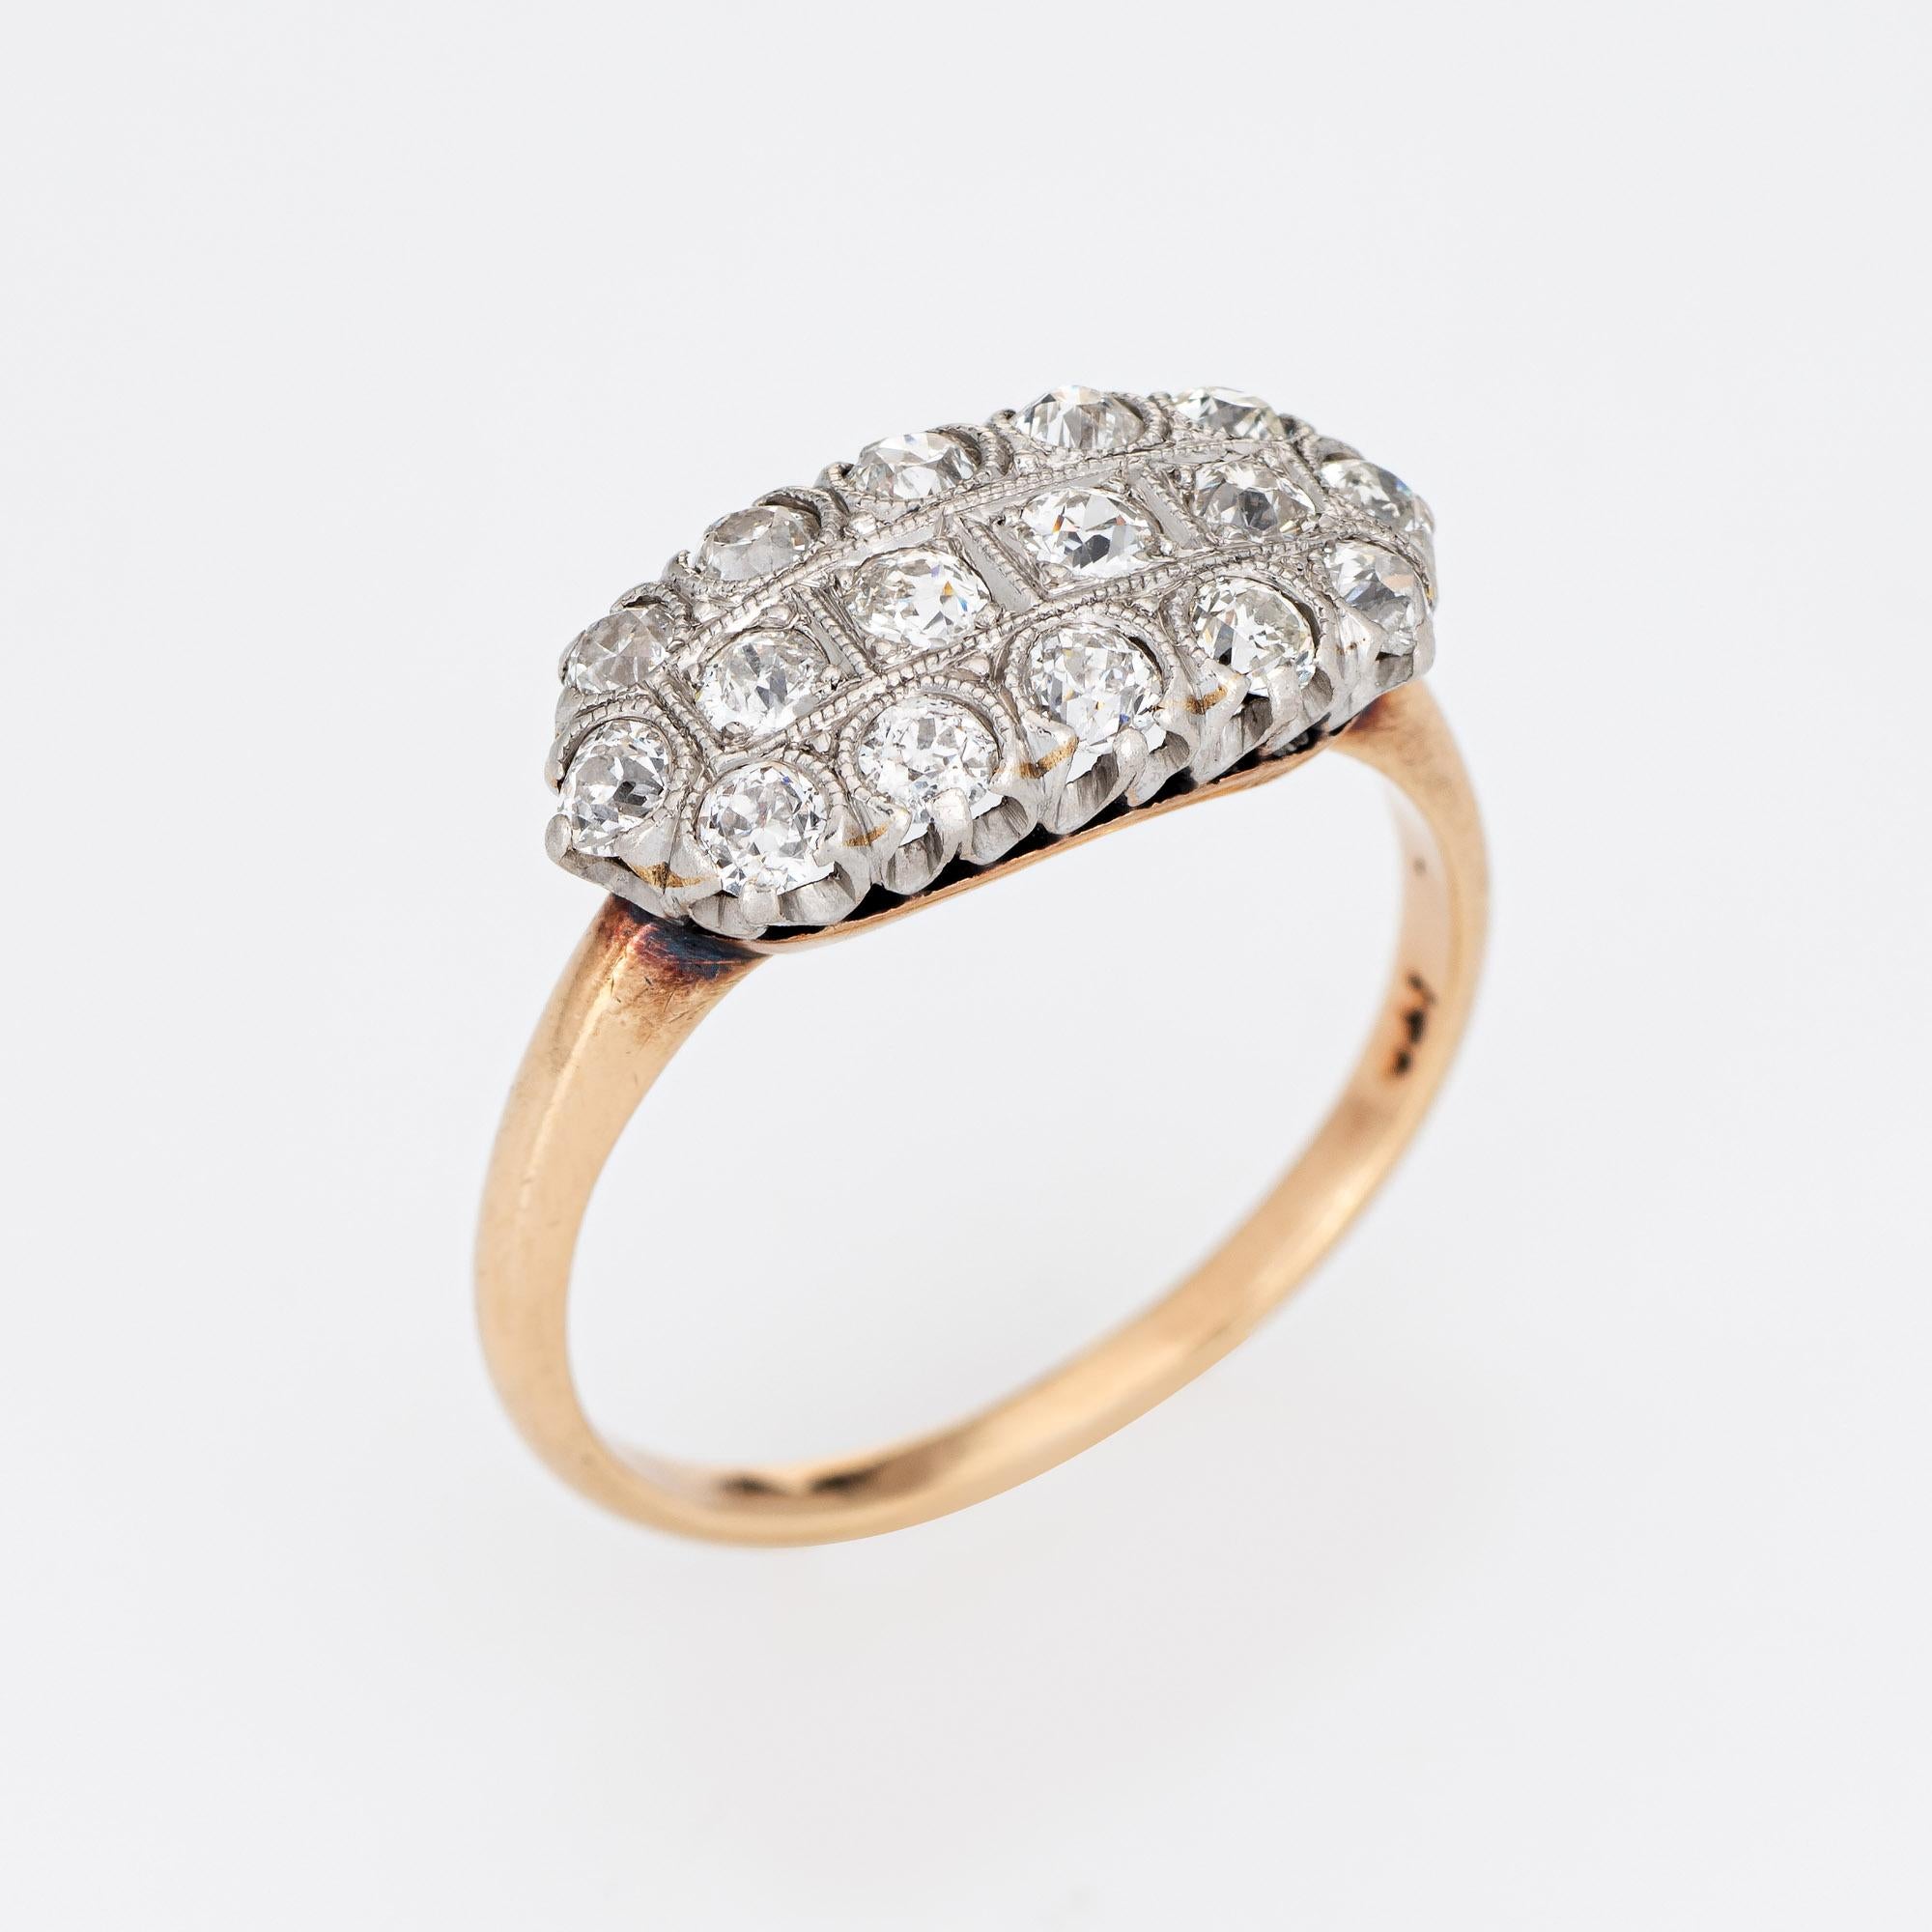 Finely detailed vintage Art Deco 3 row diamond ring (circa 1920s to 1930s) crafted in 14 karat yellow gold & platinum. 

16 old mine cut diamonds are estimated at 0.05 carats each and total an estimated 0.80 carats (estimated at H-I color and SI1-I1